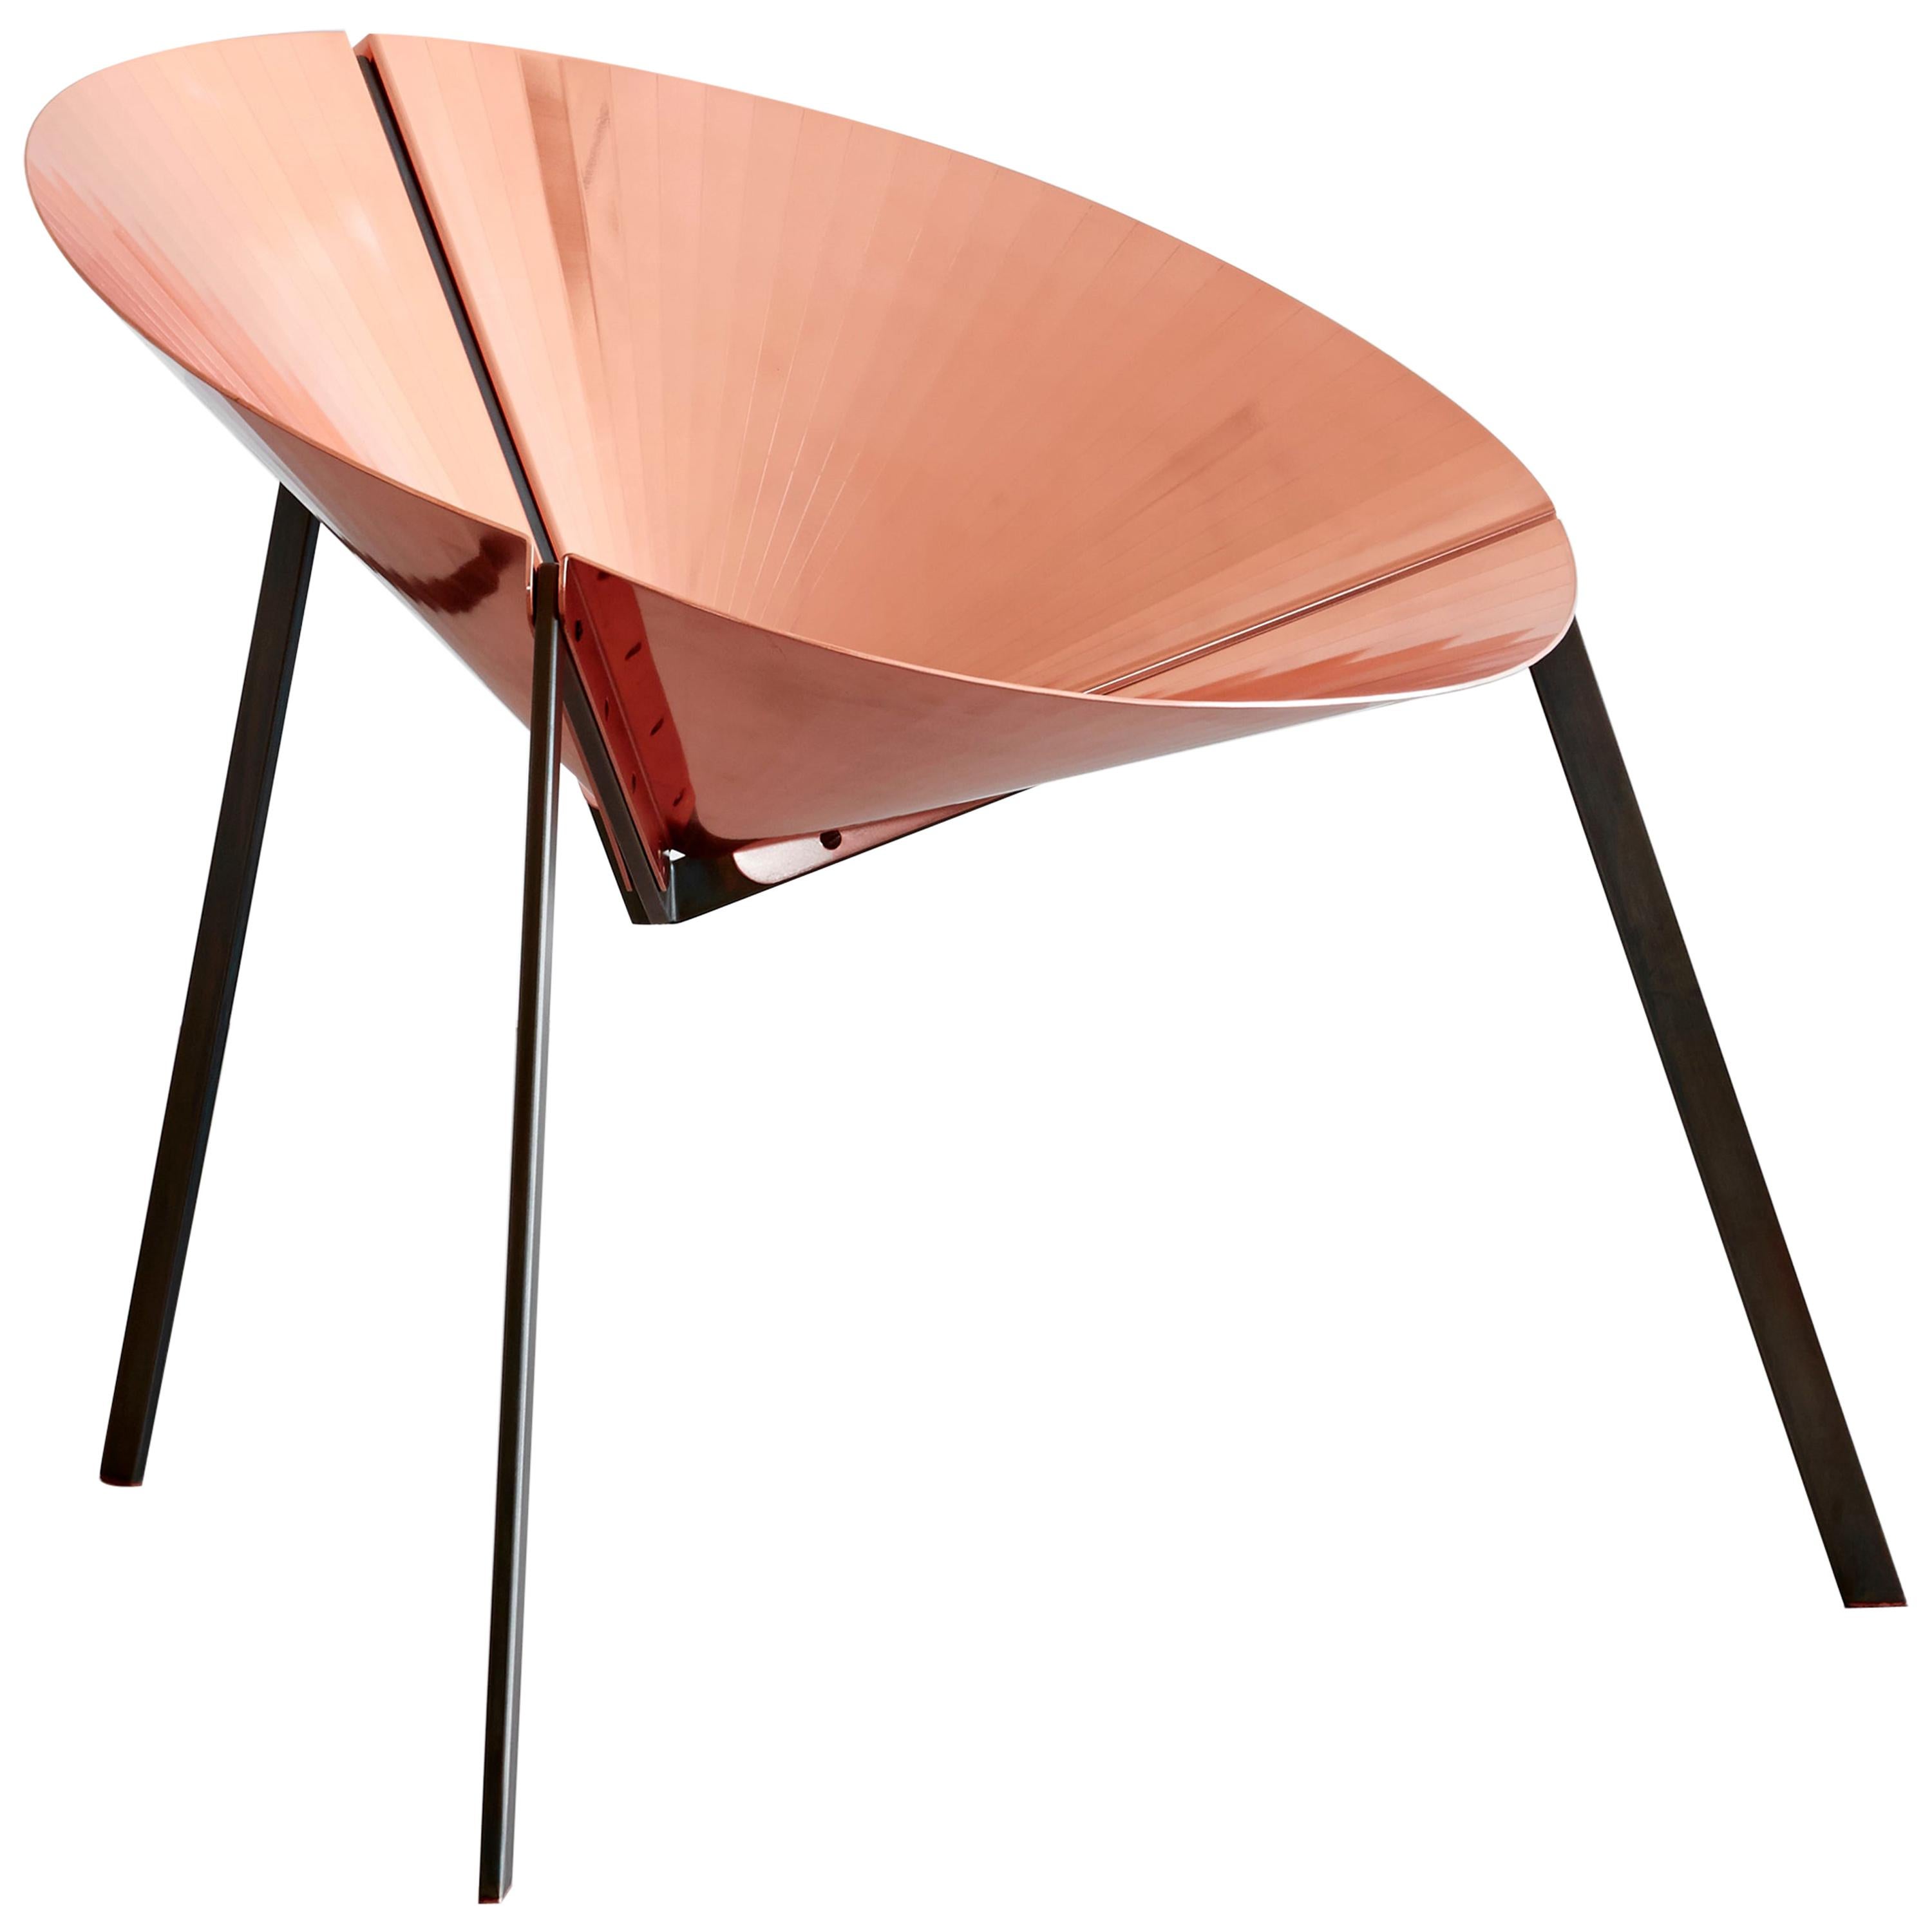 DeCastelli Pensando Ad Acapulco Chair in Polished Copper by IvDesign For Sale